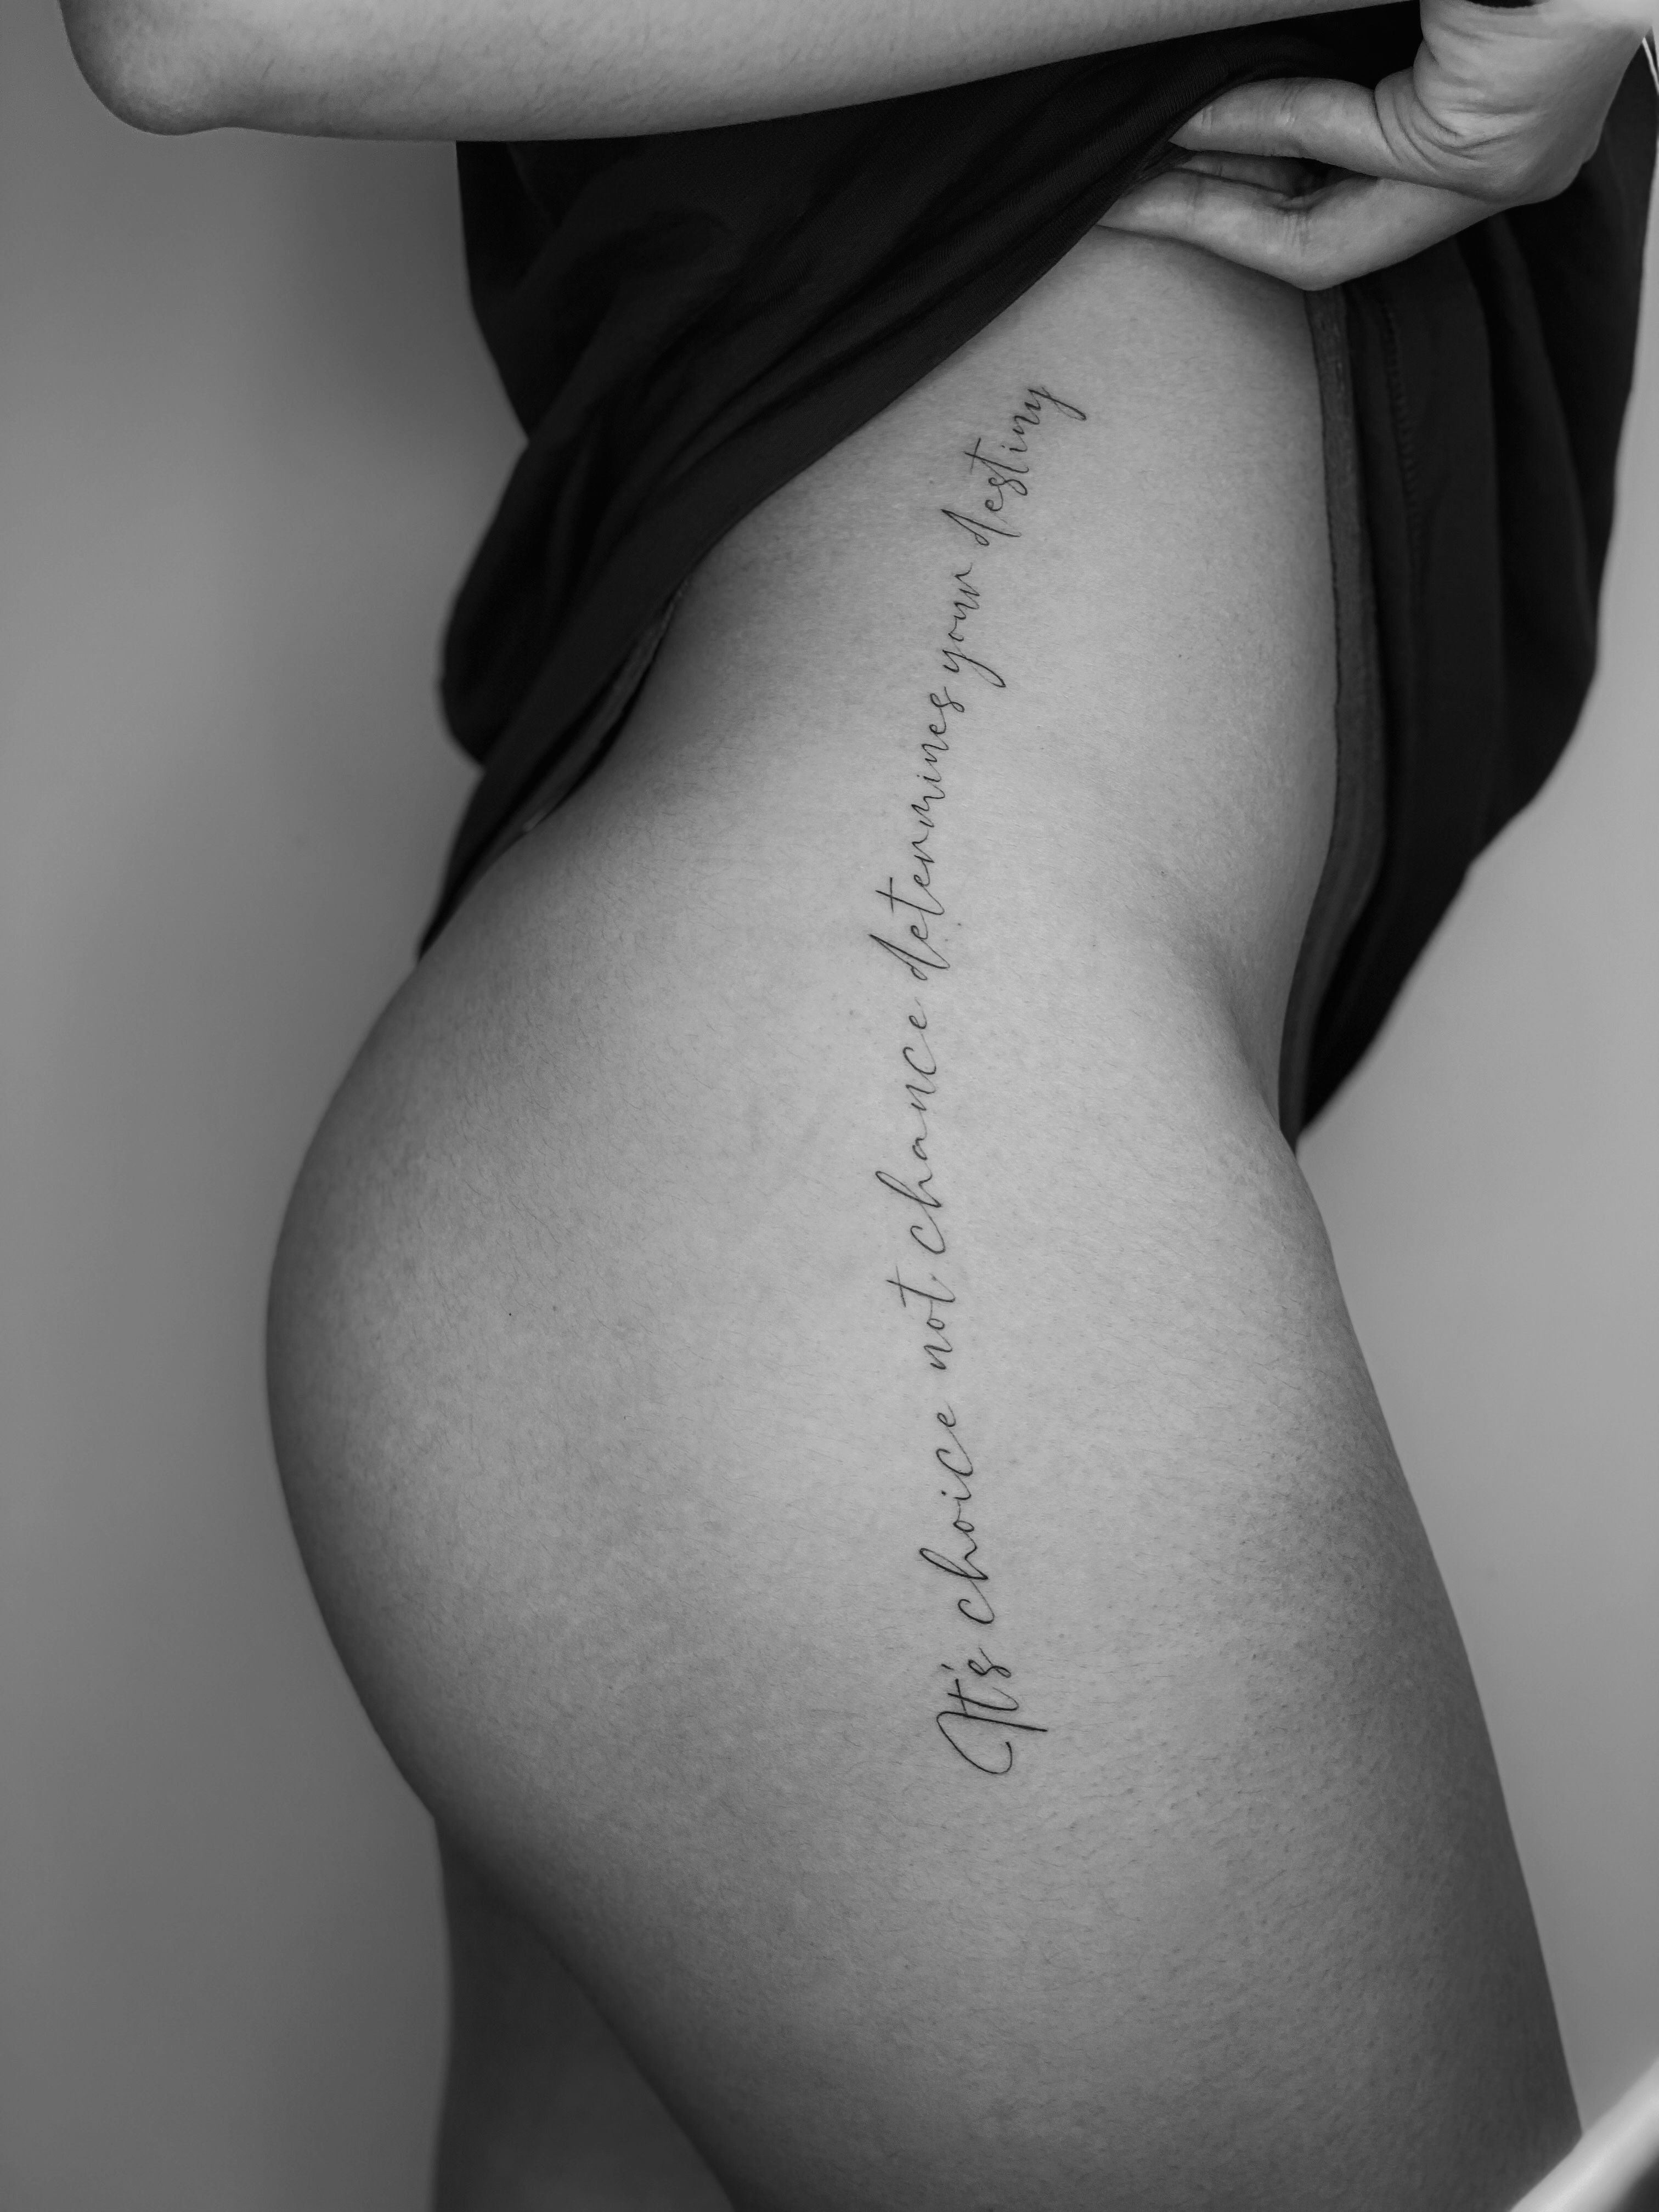 Thigh Tattoo with Romantic Quote